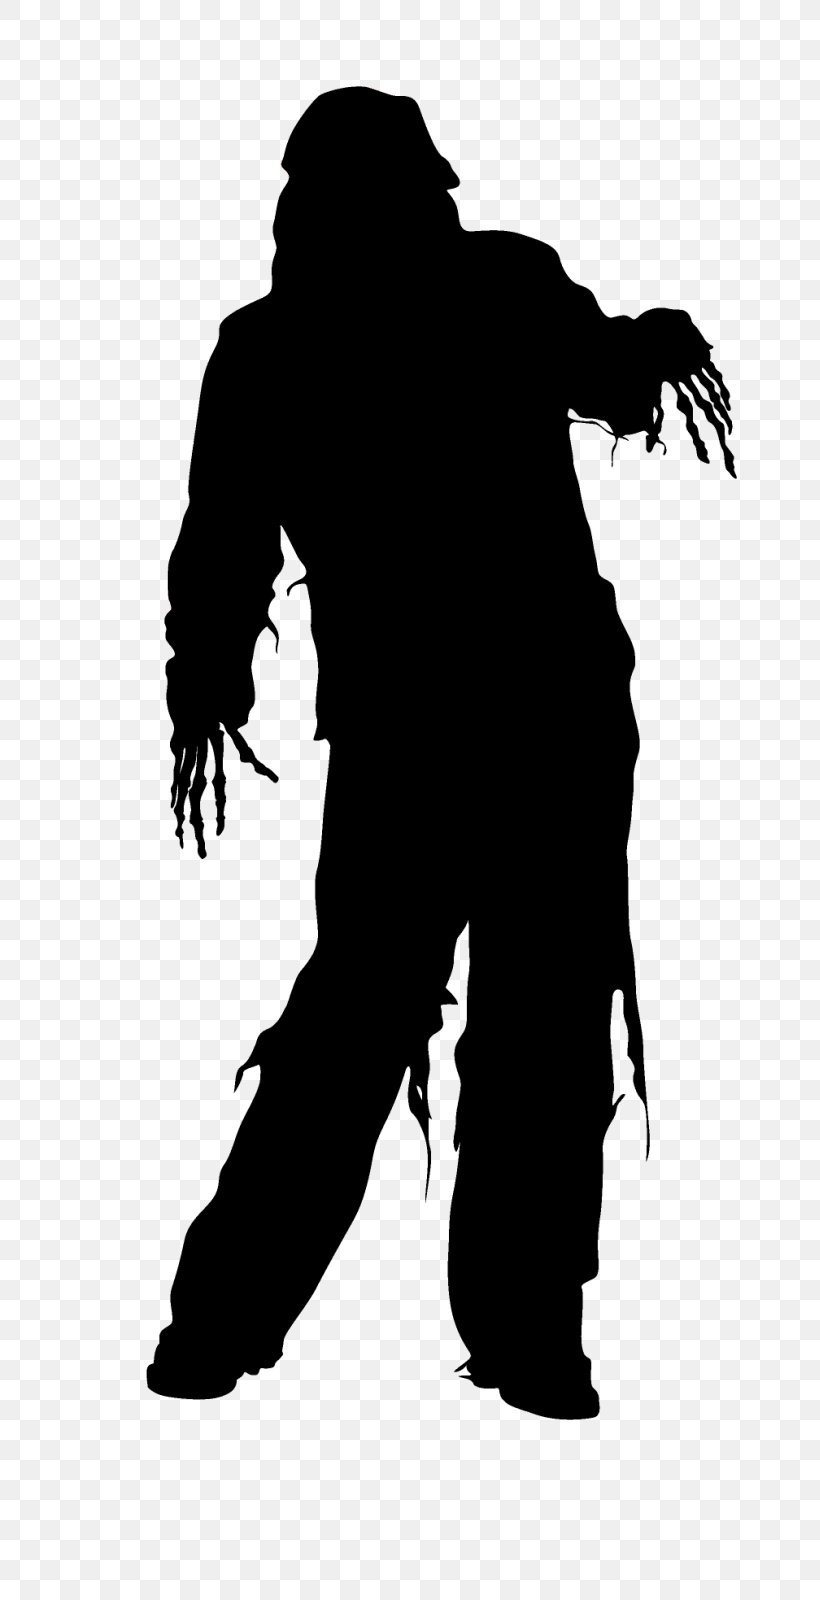 Silhouette Halloween Film Series Drawing, PNG, 819x1600px, Silhouette ...